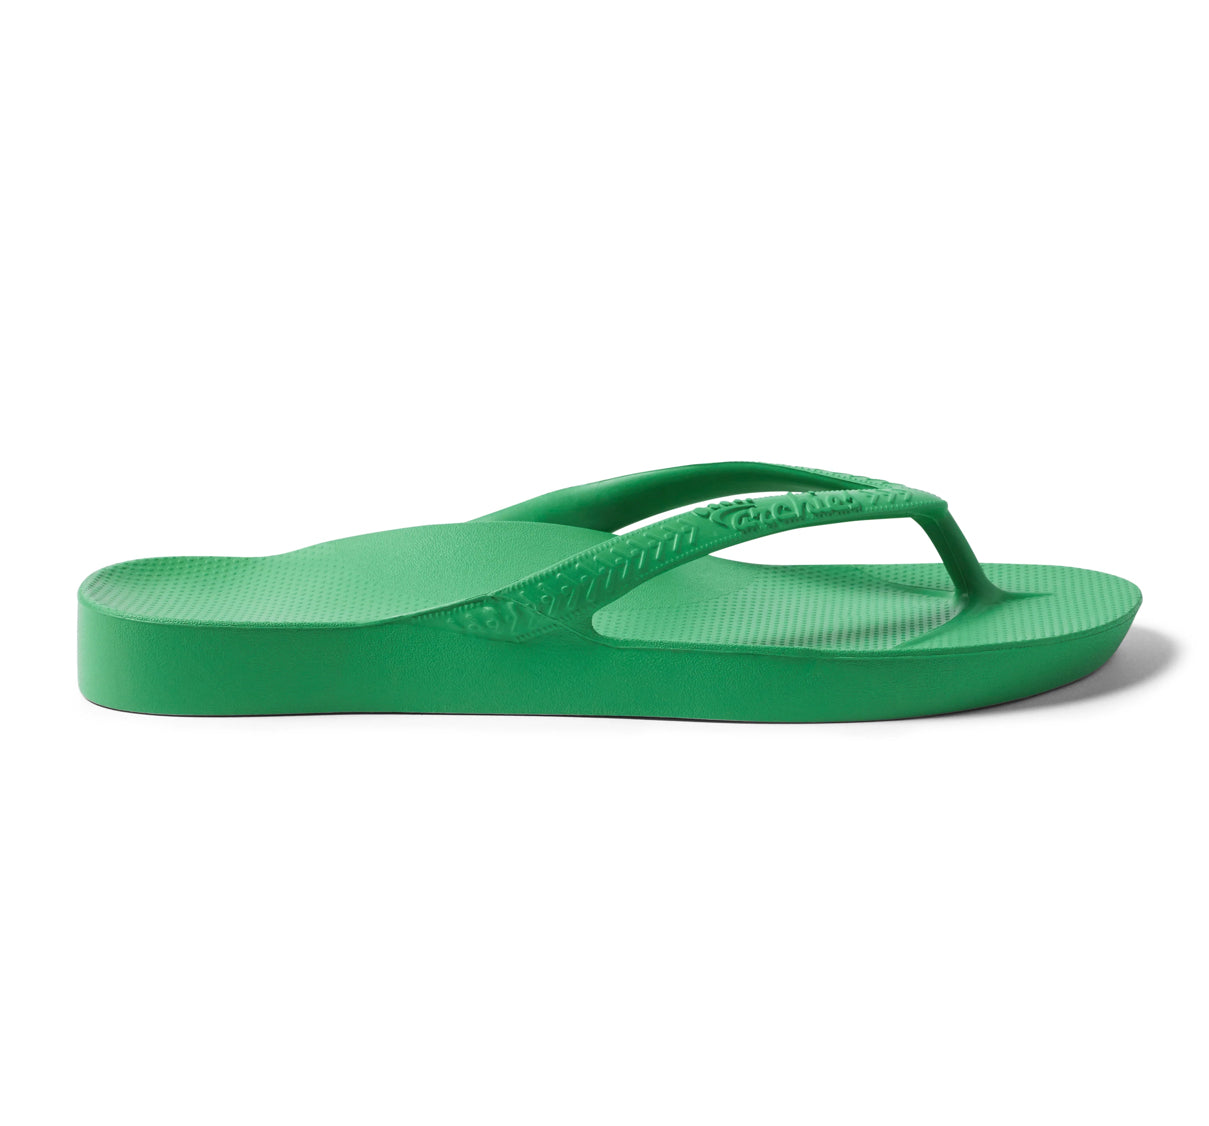 Archies Support Flip Flops Kelly Green